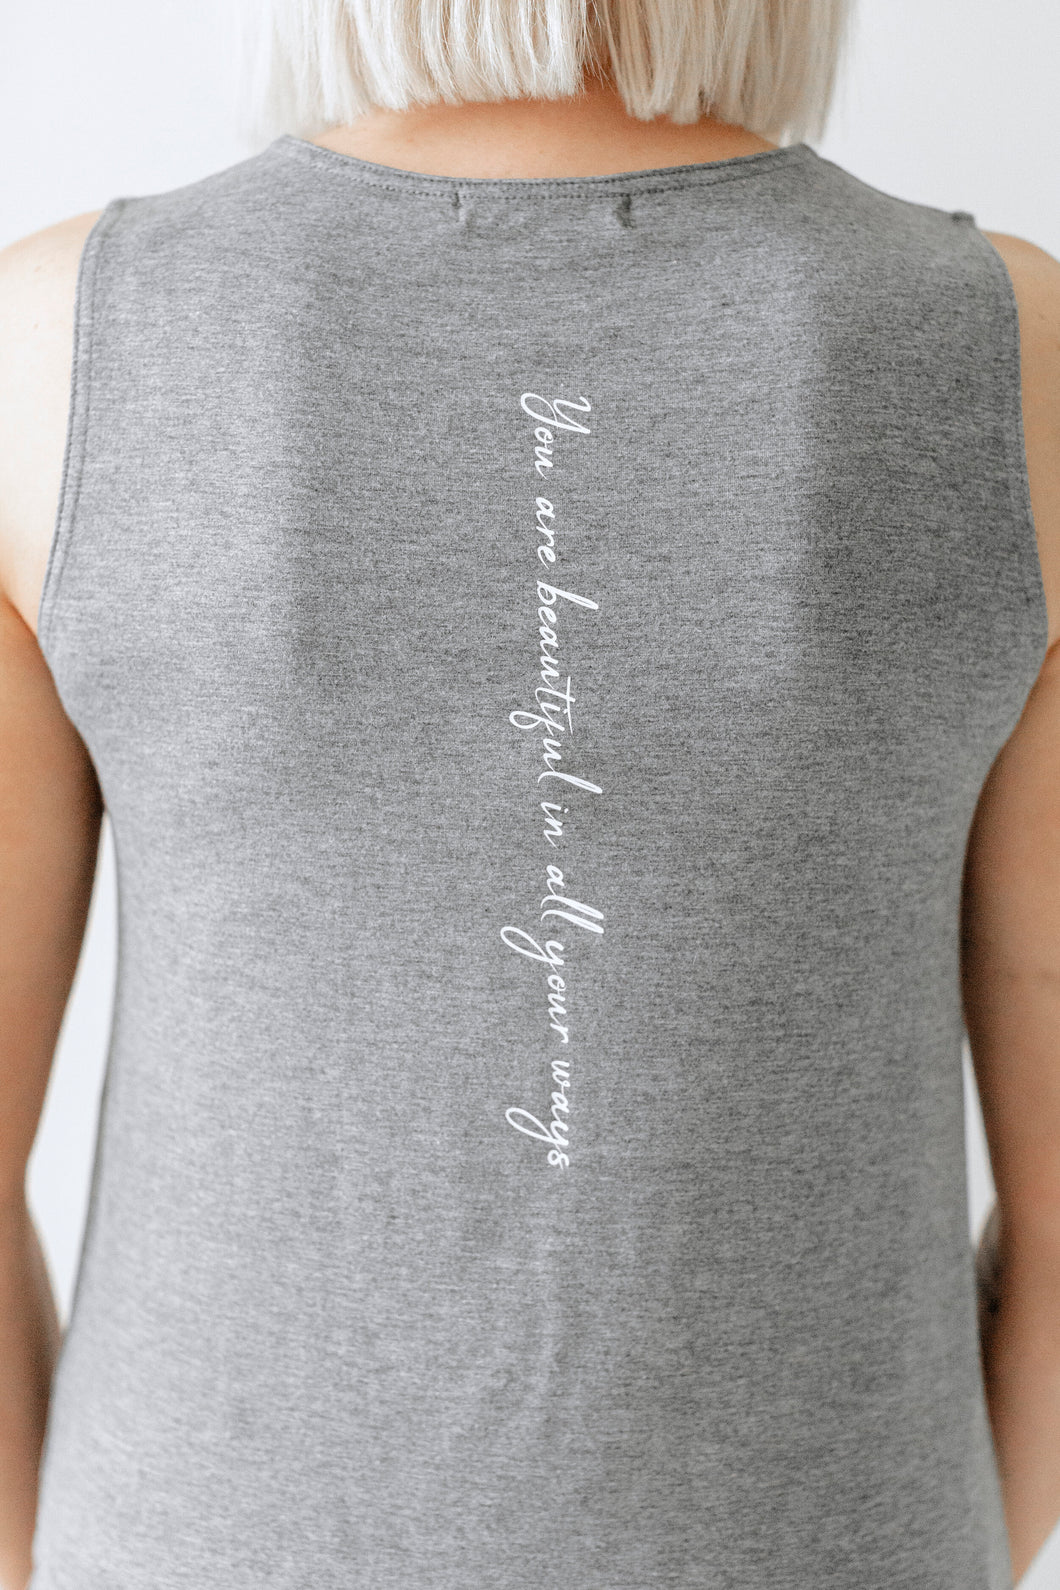 You Are Beautiful In All You Ways- Tank Top